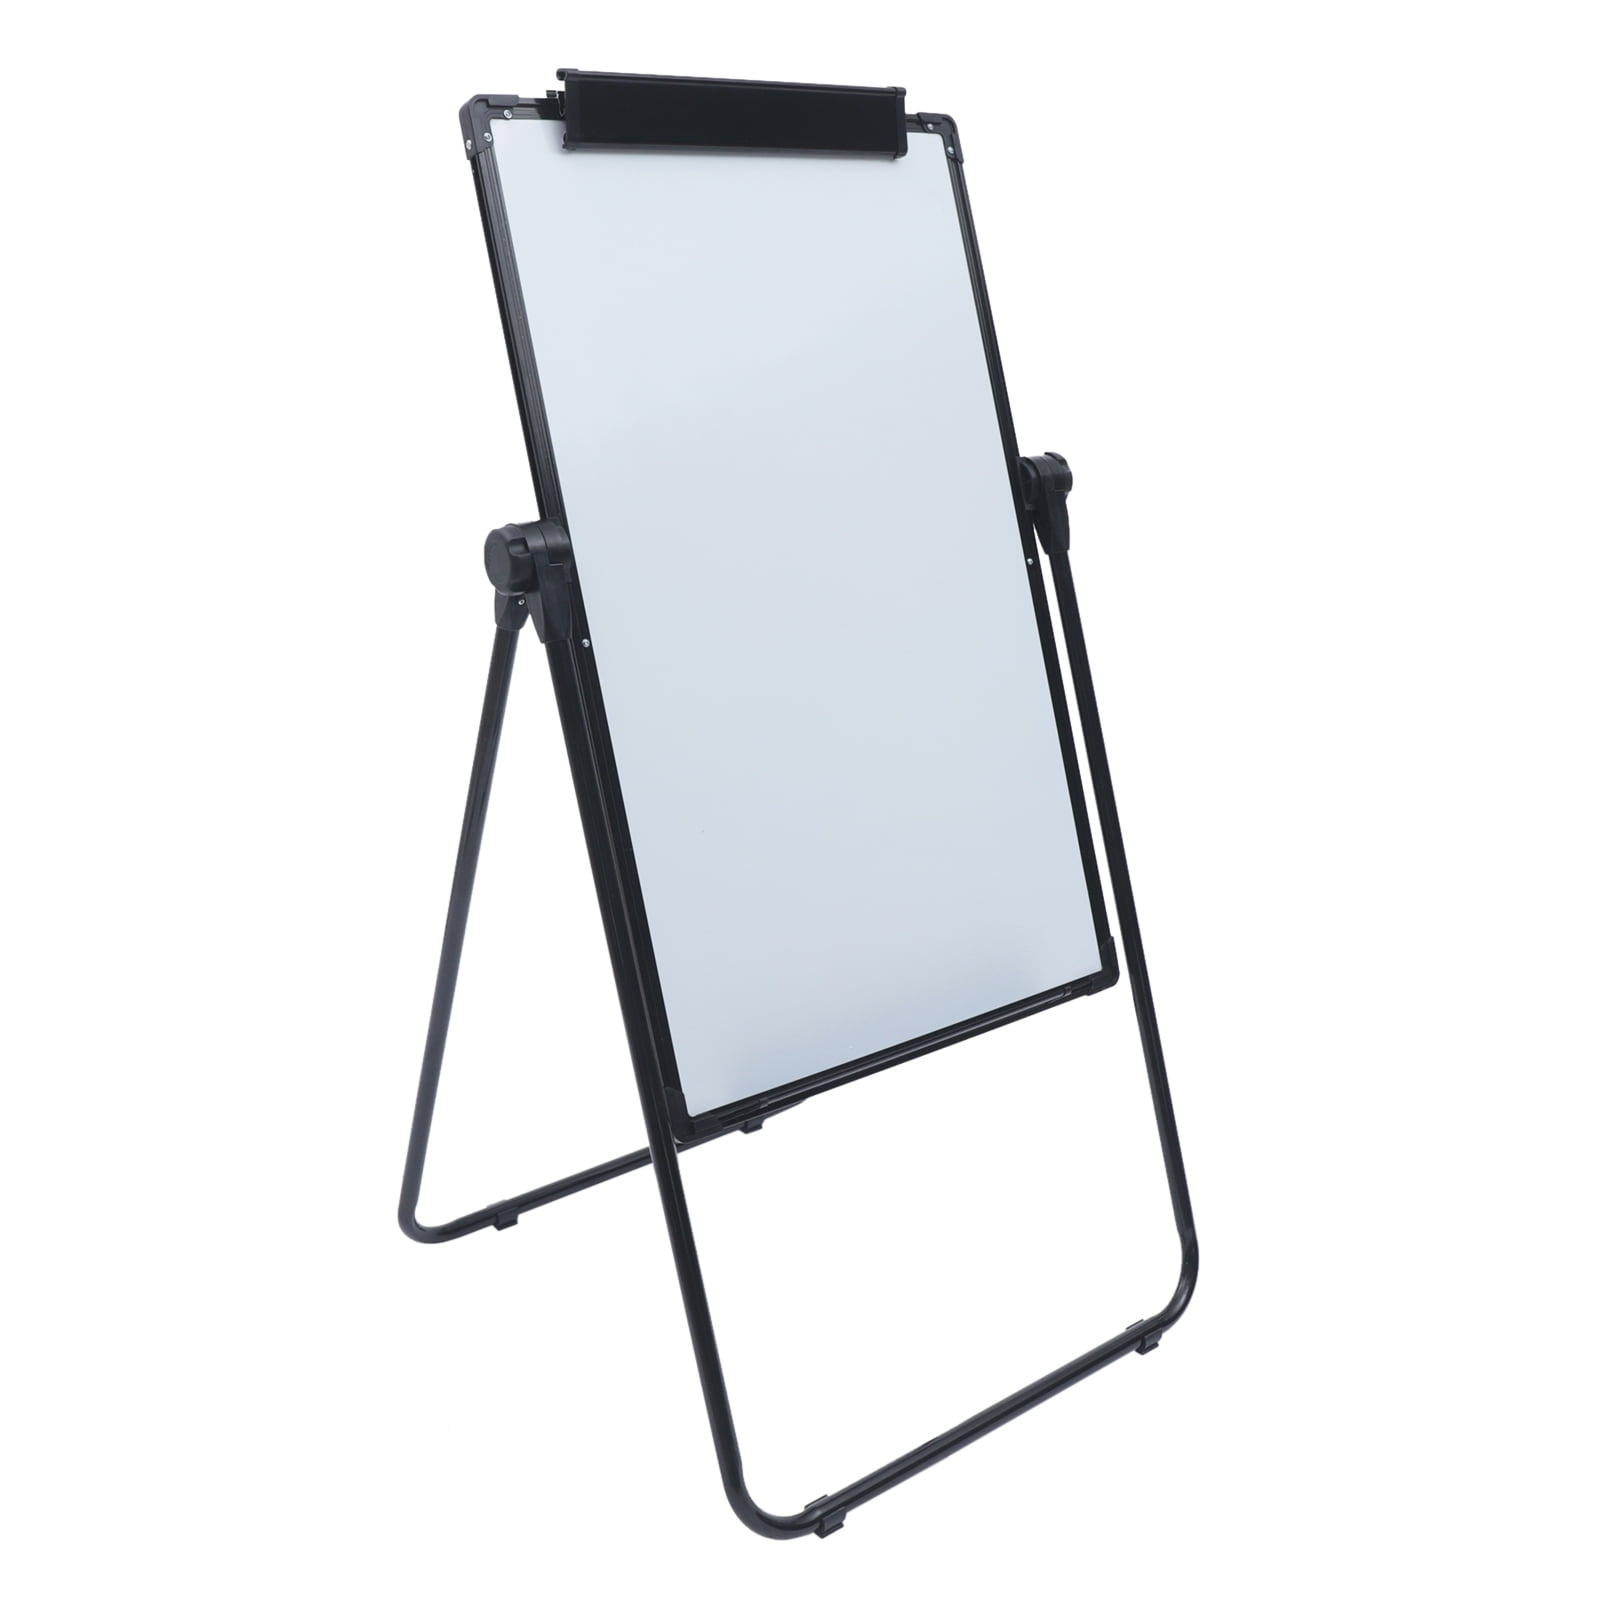 Loyalheartdy 35x24In Portable Whiteboard,Double Sided Magnetic Dry